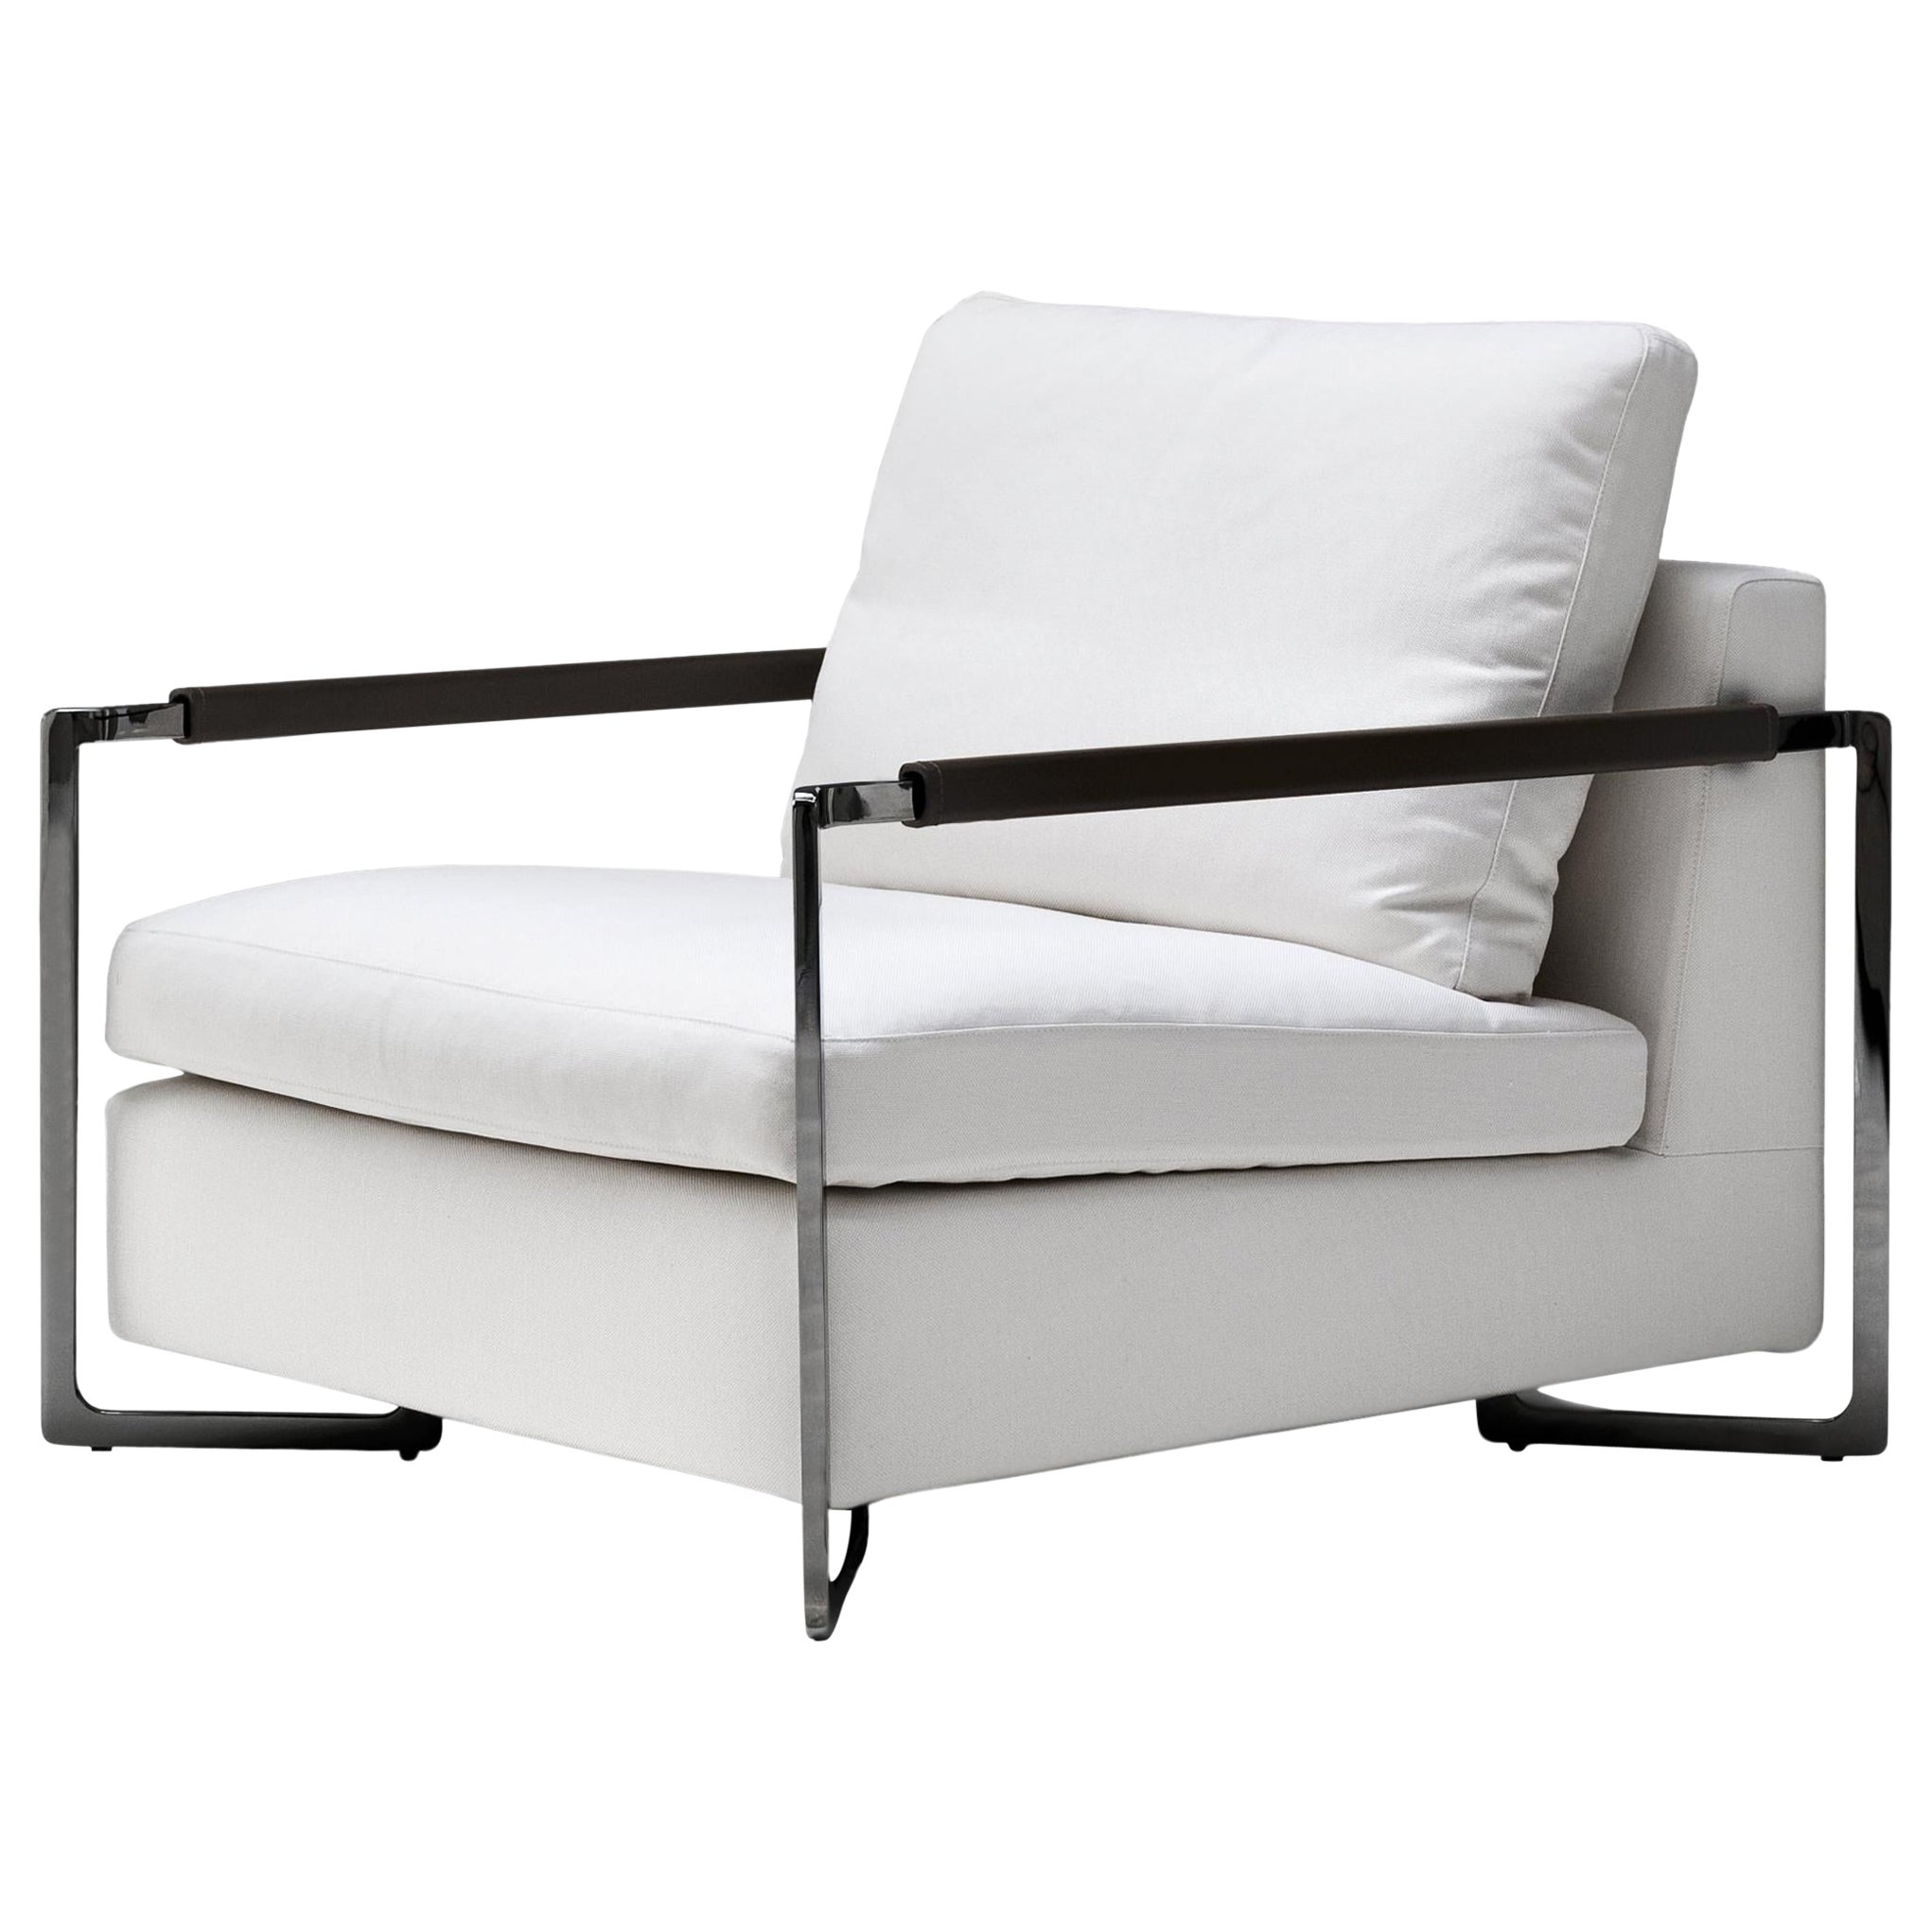 No Logo Light Armchair Lusso White Upholstery & Nickel Frame by Sergio Bicego For Sale